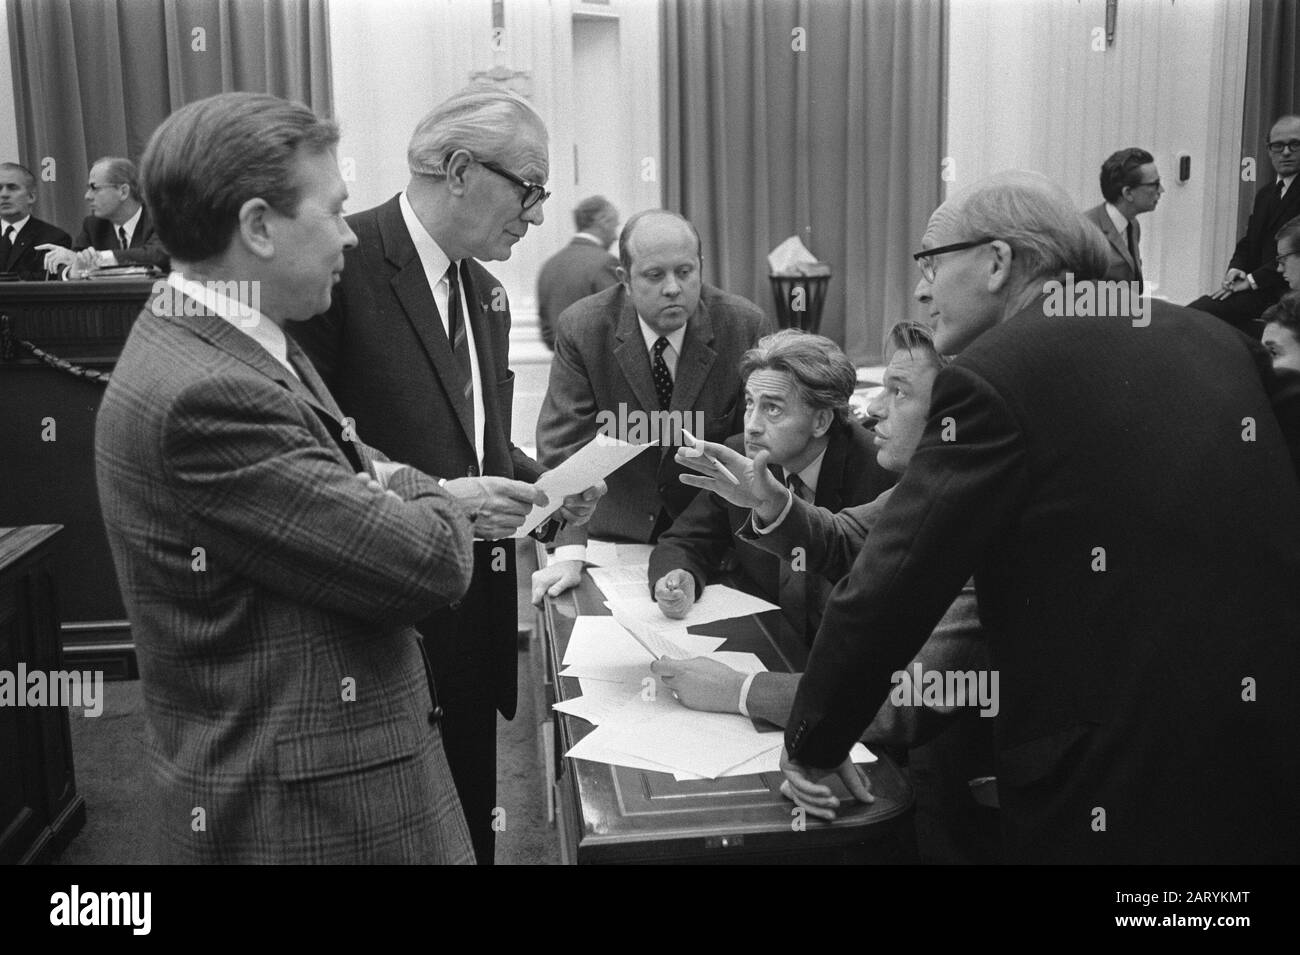 House votes on various motions submitted to nota-defense, deliberation motion submit. Wieldraaijer, Wierda, Janssen, Imkamp, Van Mierlo, Franssen Date: 6 November 1969 Location: The Hague, Zuid-Holland Keywords: debates, politicians, political Person: Franssen, H.M., Imkamp, Mierlo, H.A.F.M.O. van, Wieldraaijer, E.R. Stock Photo